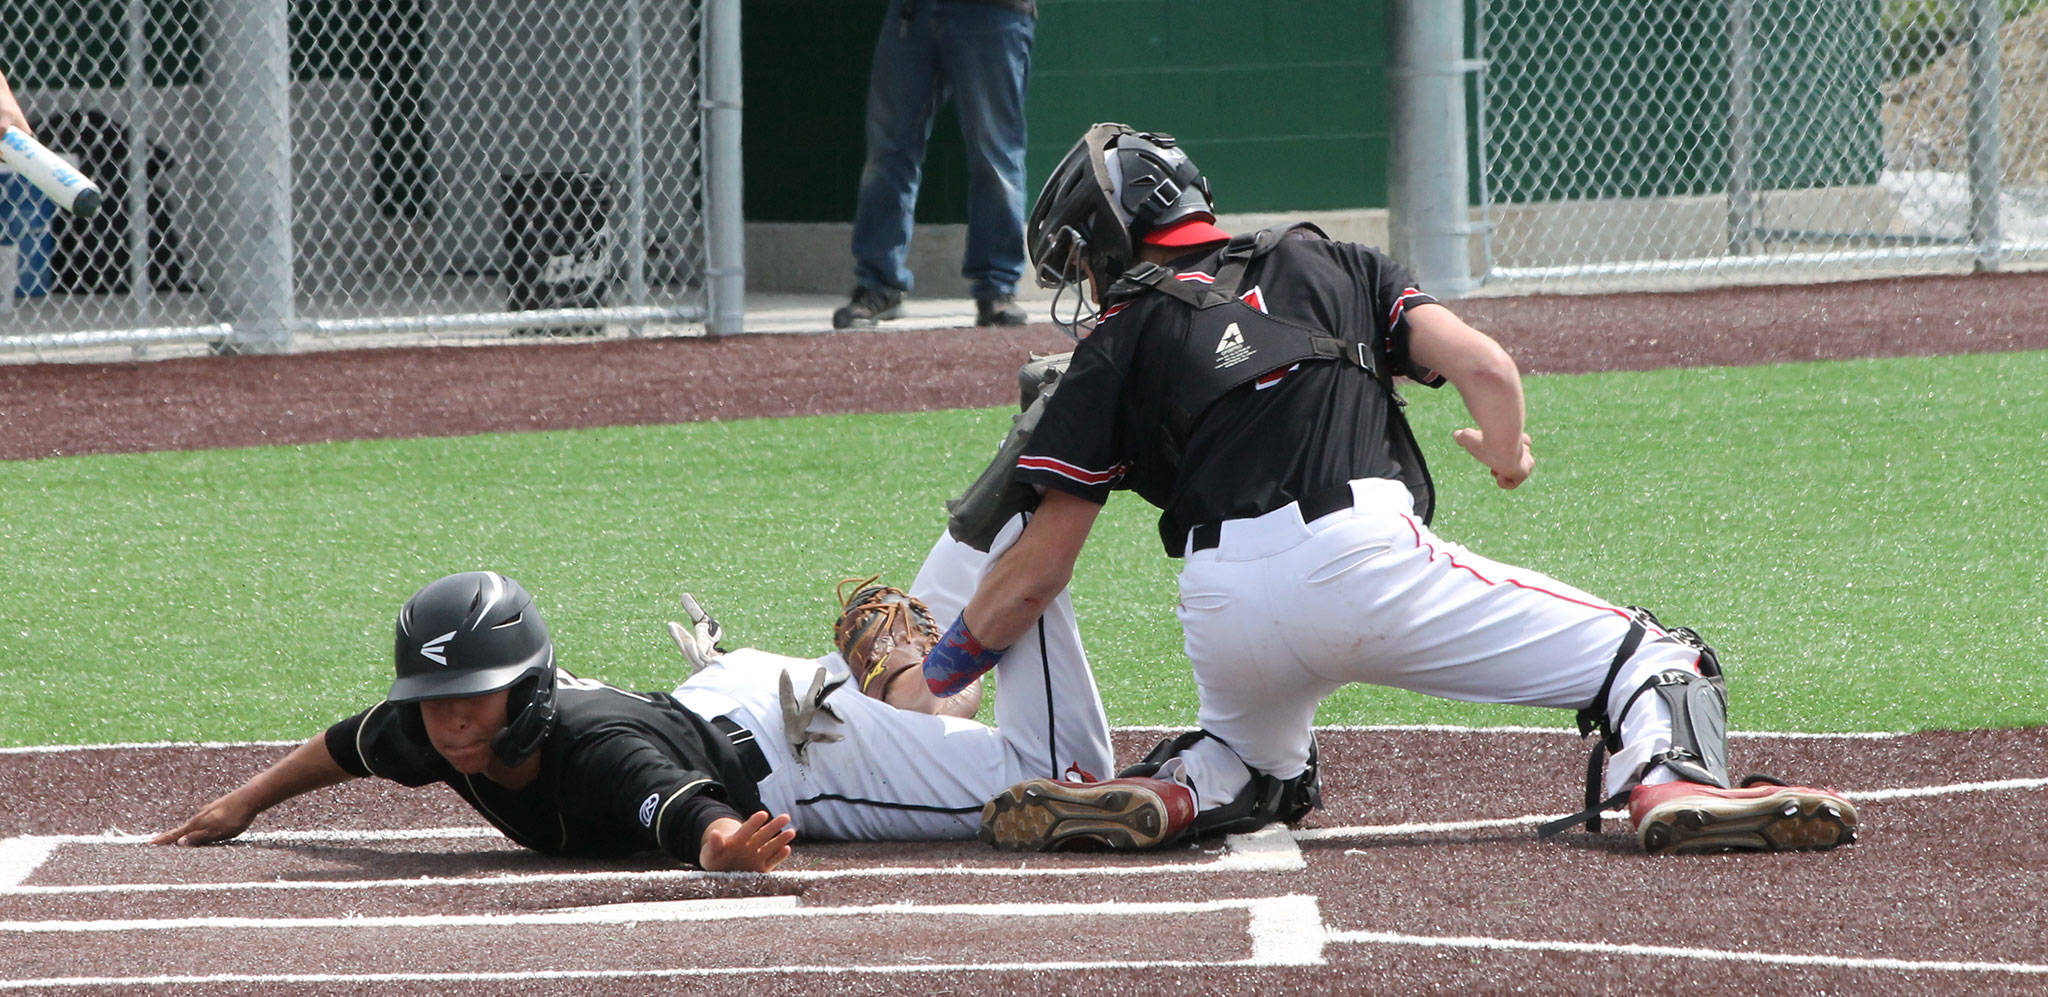 Coupeville catcher Gavin Knoblich appears to tag out Meridian’s Arturo Madrigal. Madrigal, however, was called safe on the play in the Trojans’ win.(Photo by Jim Waller/Whidbey News-Times)